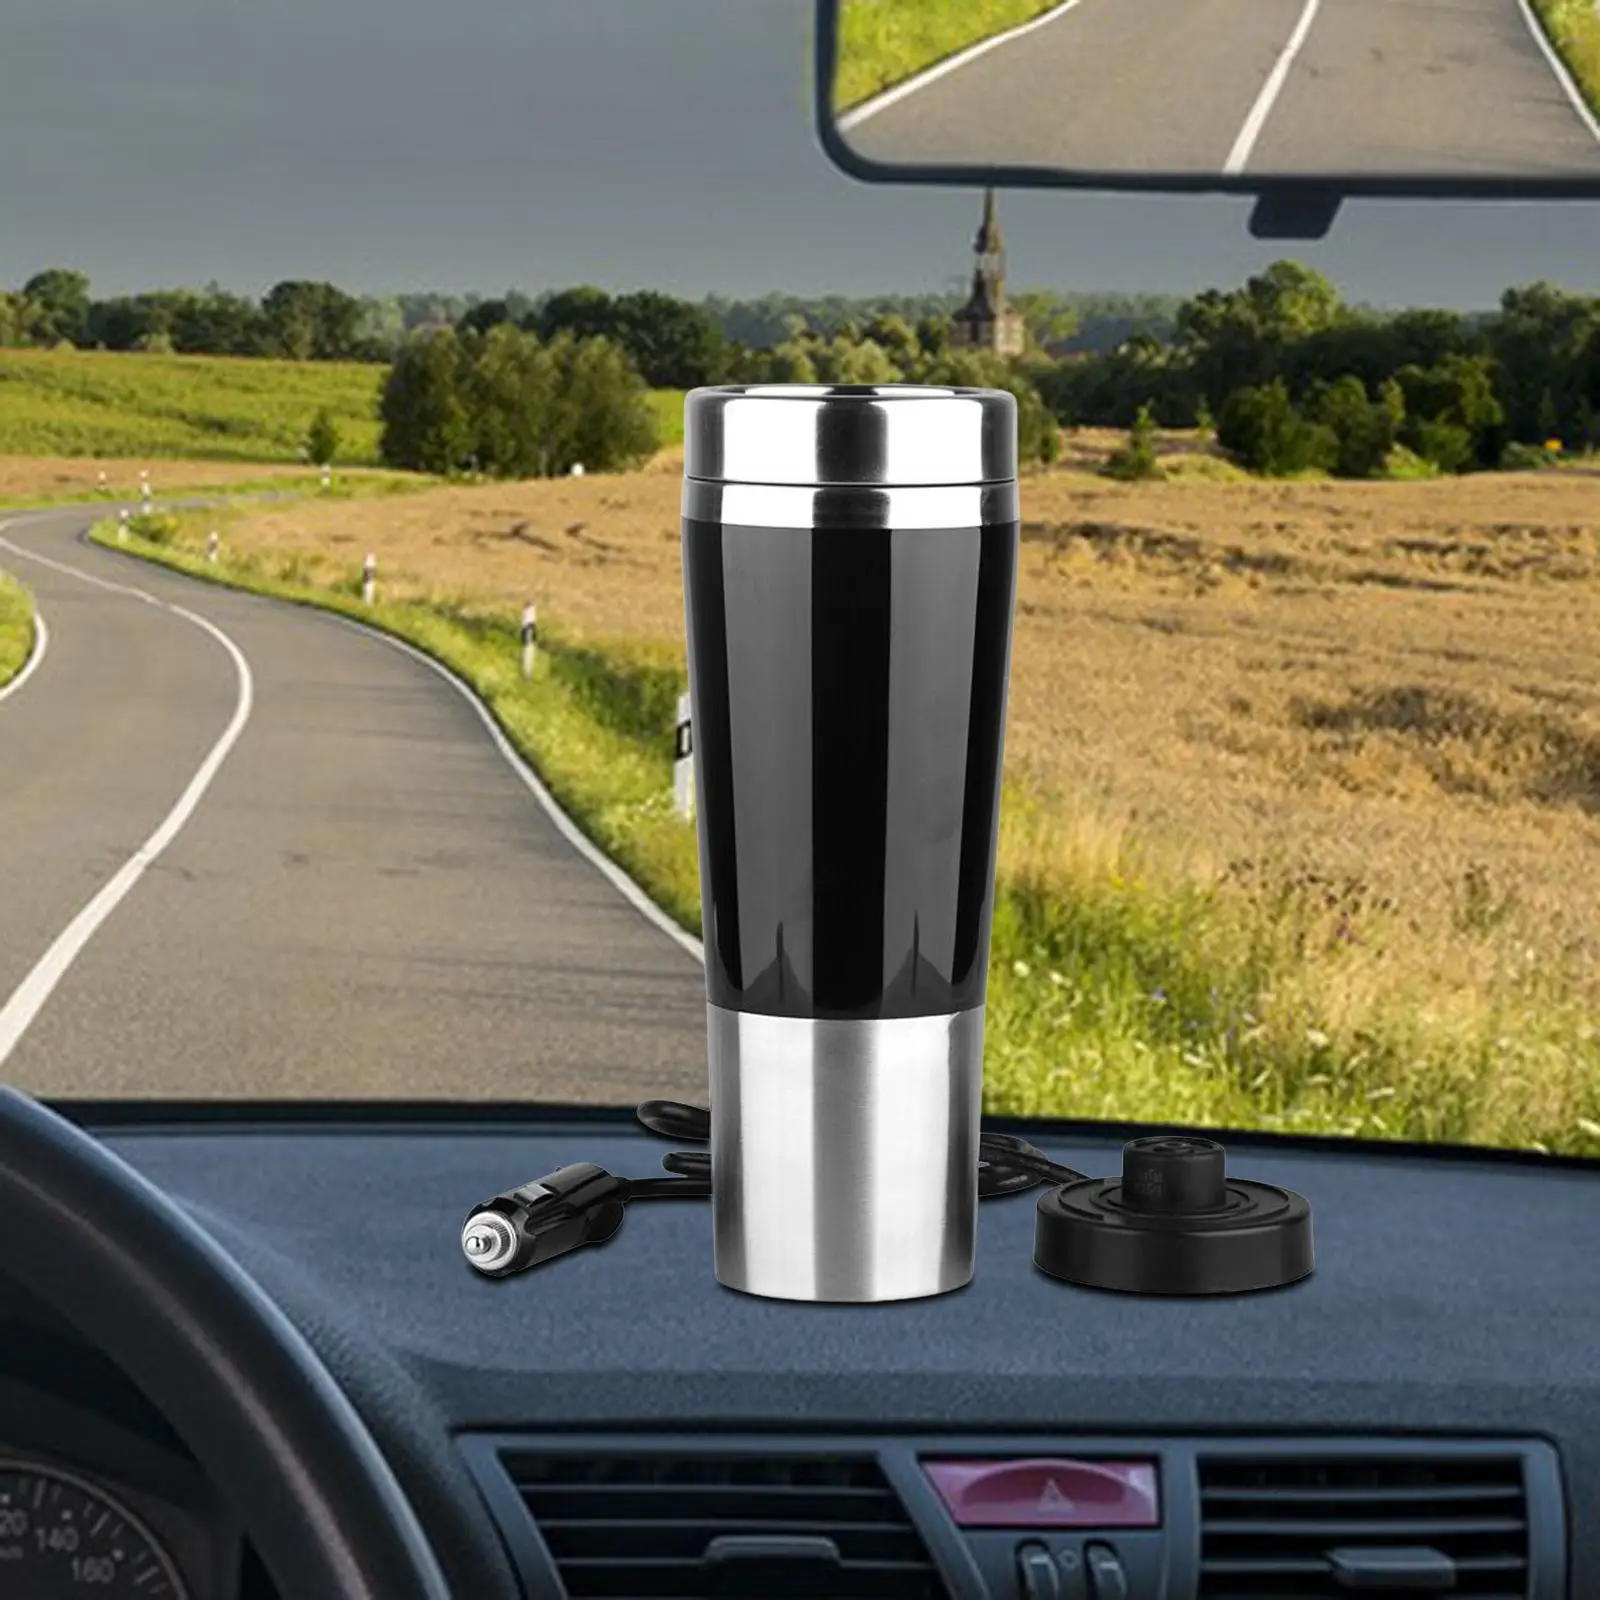 Portable 12V Car Kettle Boiler Electric Insulated Cup Heated Water Boiler Heater Cup for Coffee Milk Water Camping